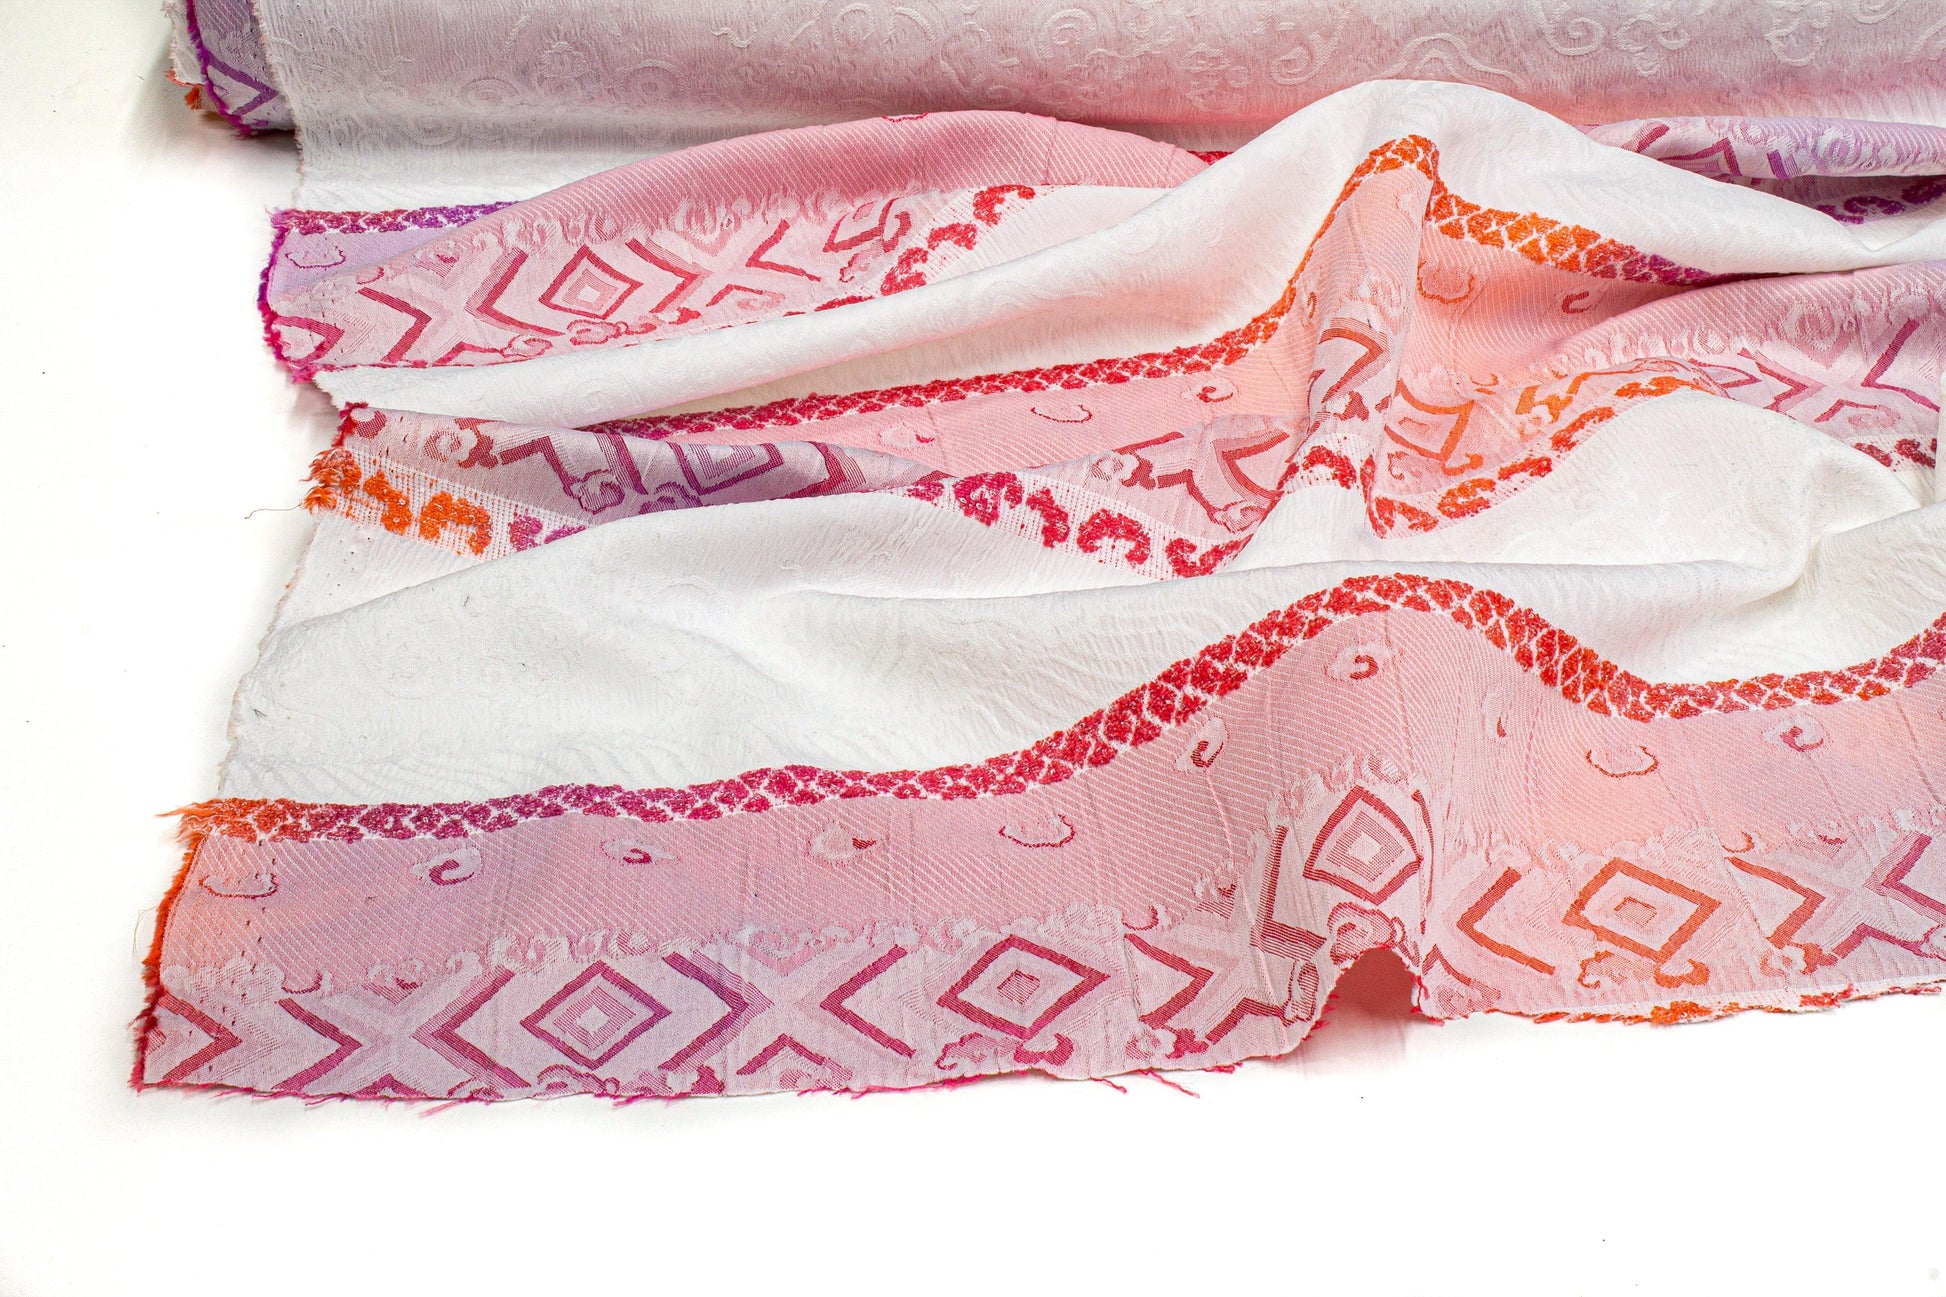 Embroidered Jacquard - Iridescent Pink, Purple, and White - Prime Fabrics